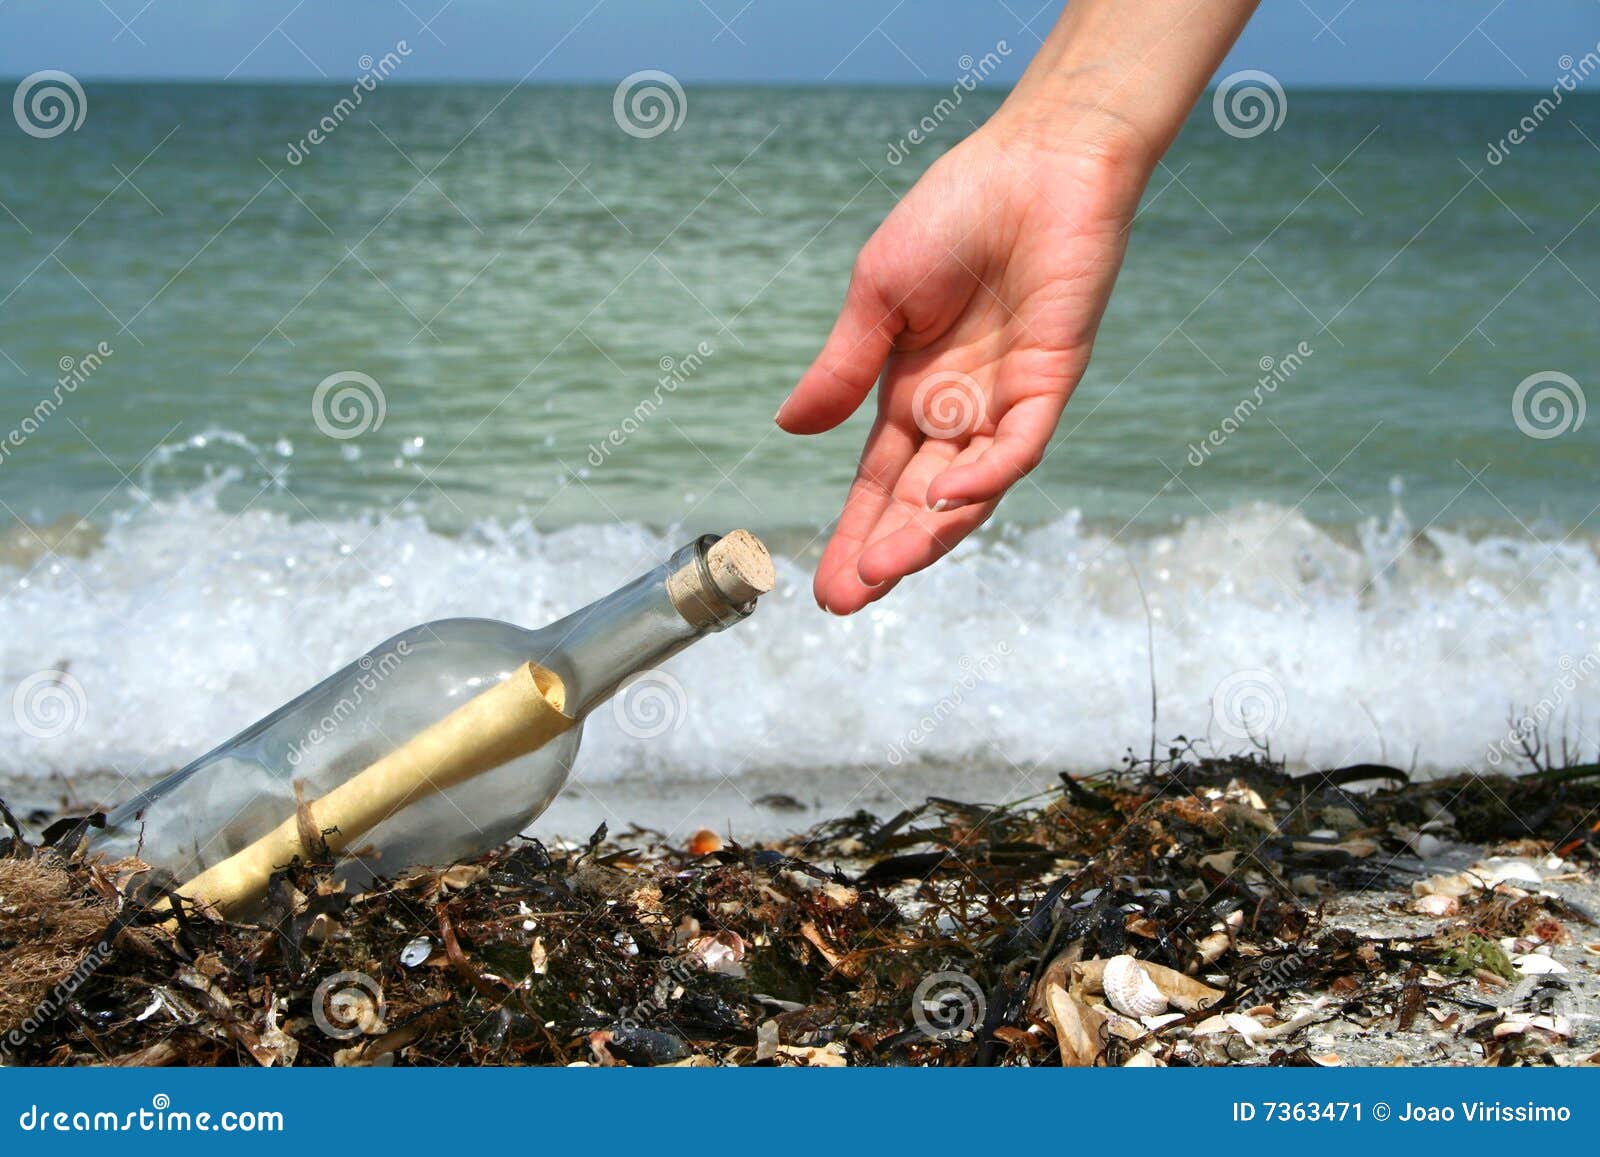 finding a message in a bottle